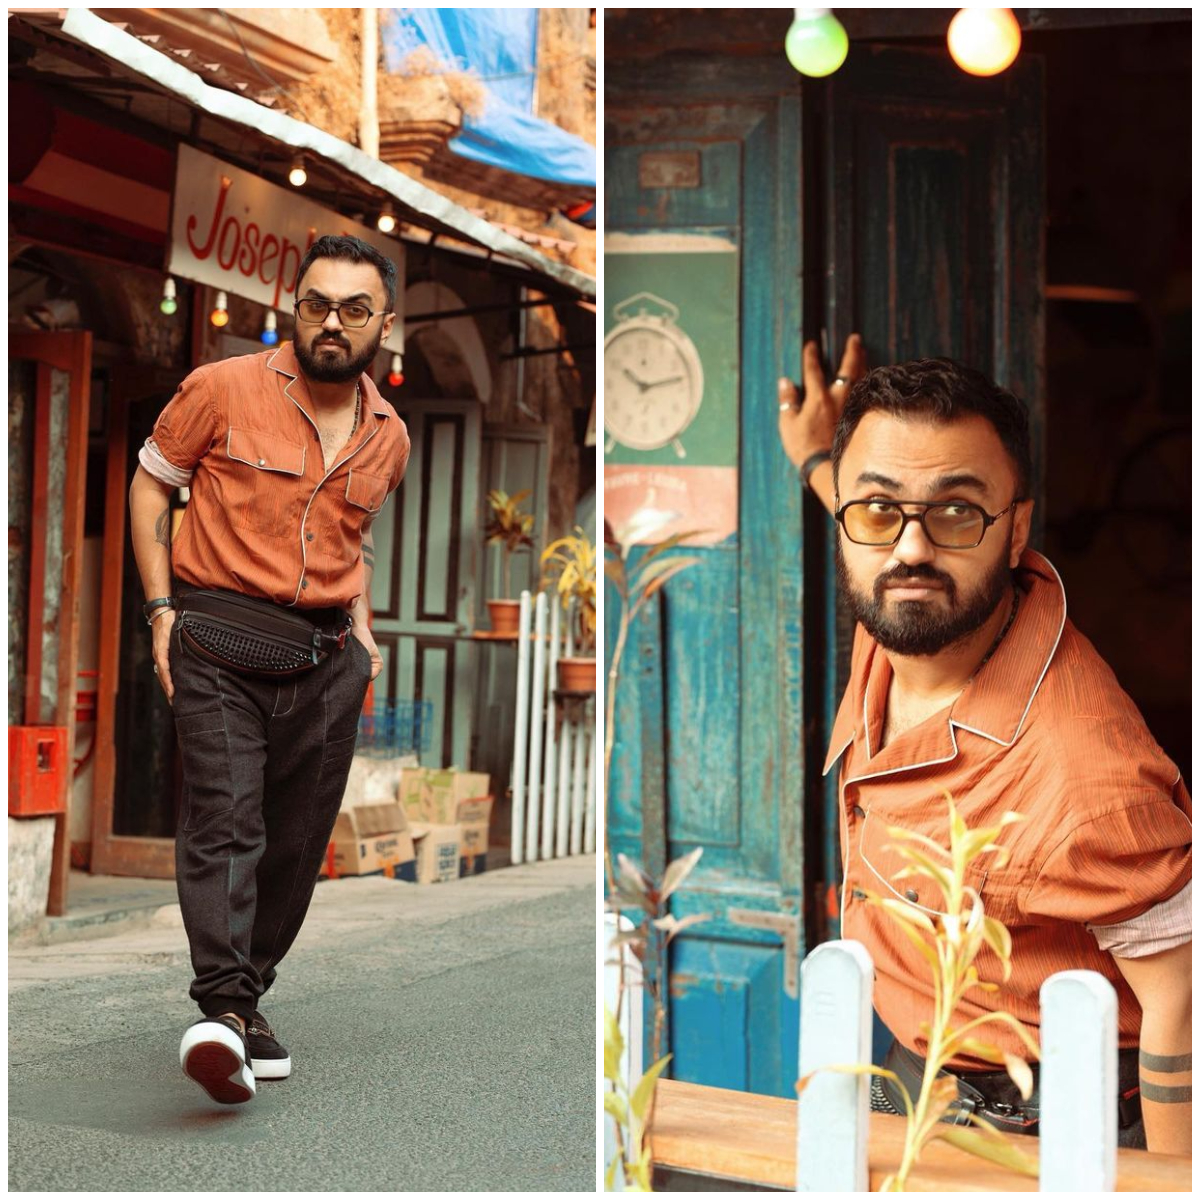 EXCLUSIVE: Celeb stylist Akshay Tyagi on the Harry Styles approach to styling, decoding Bollywood stars’ style